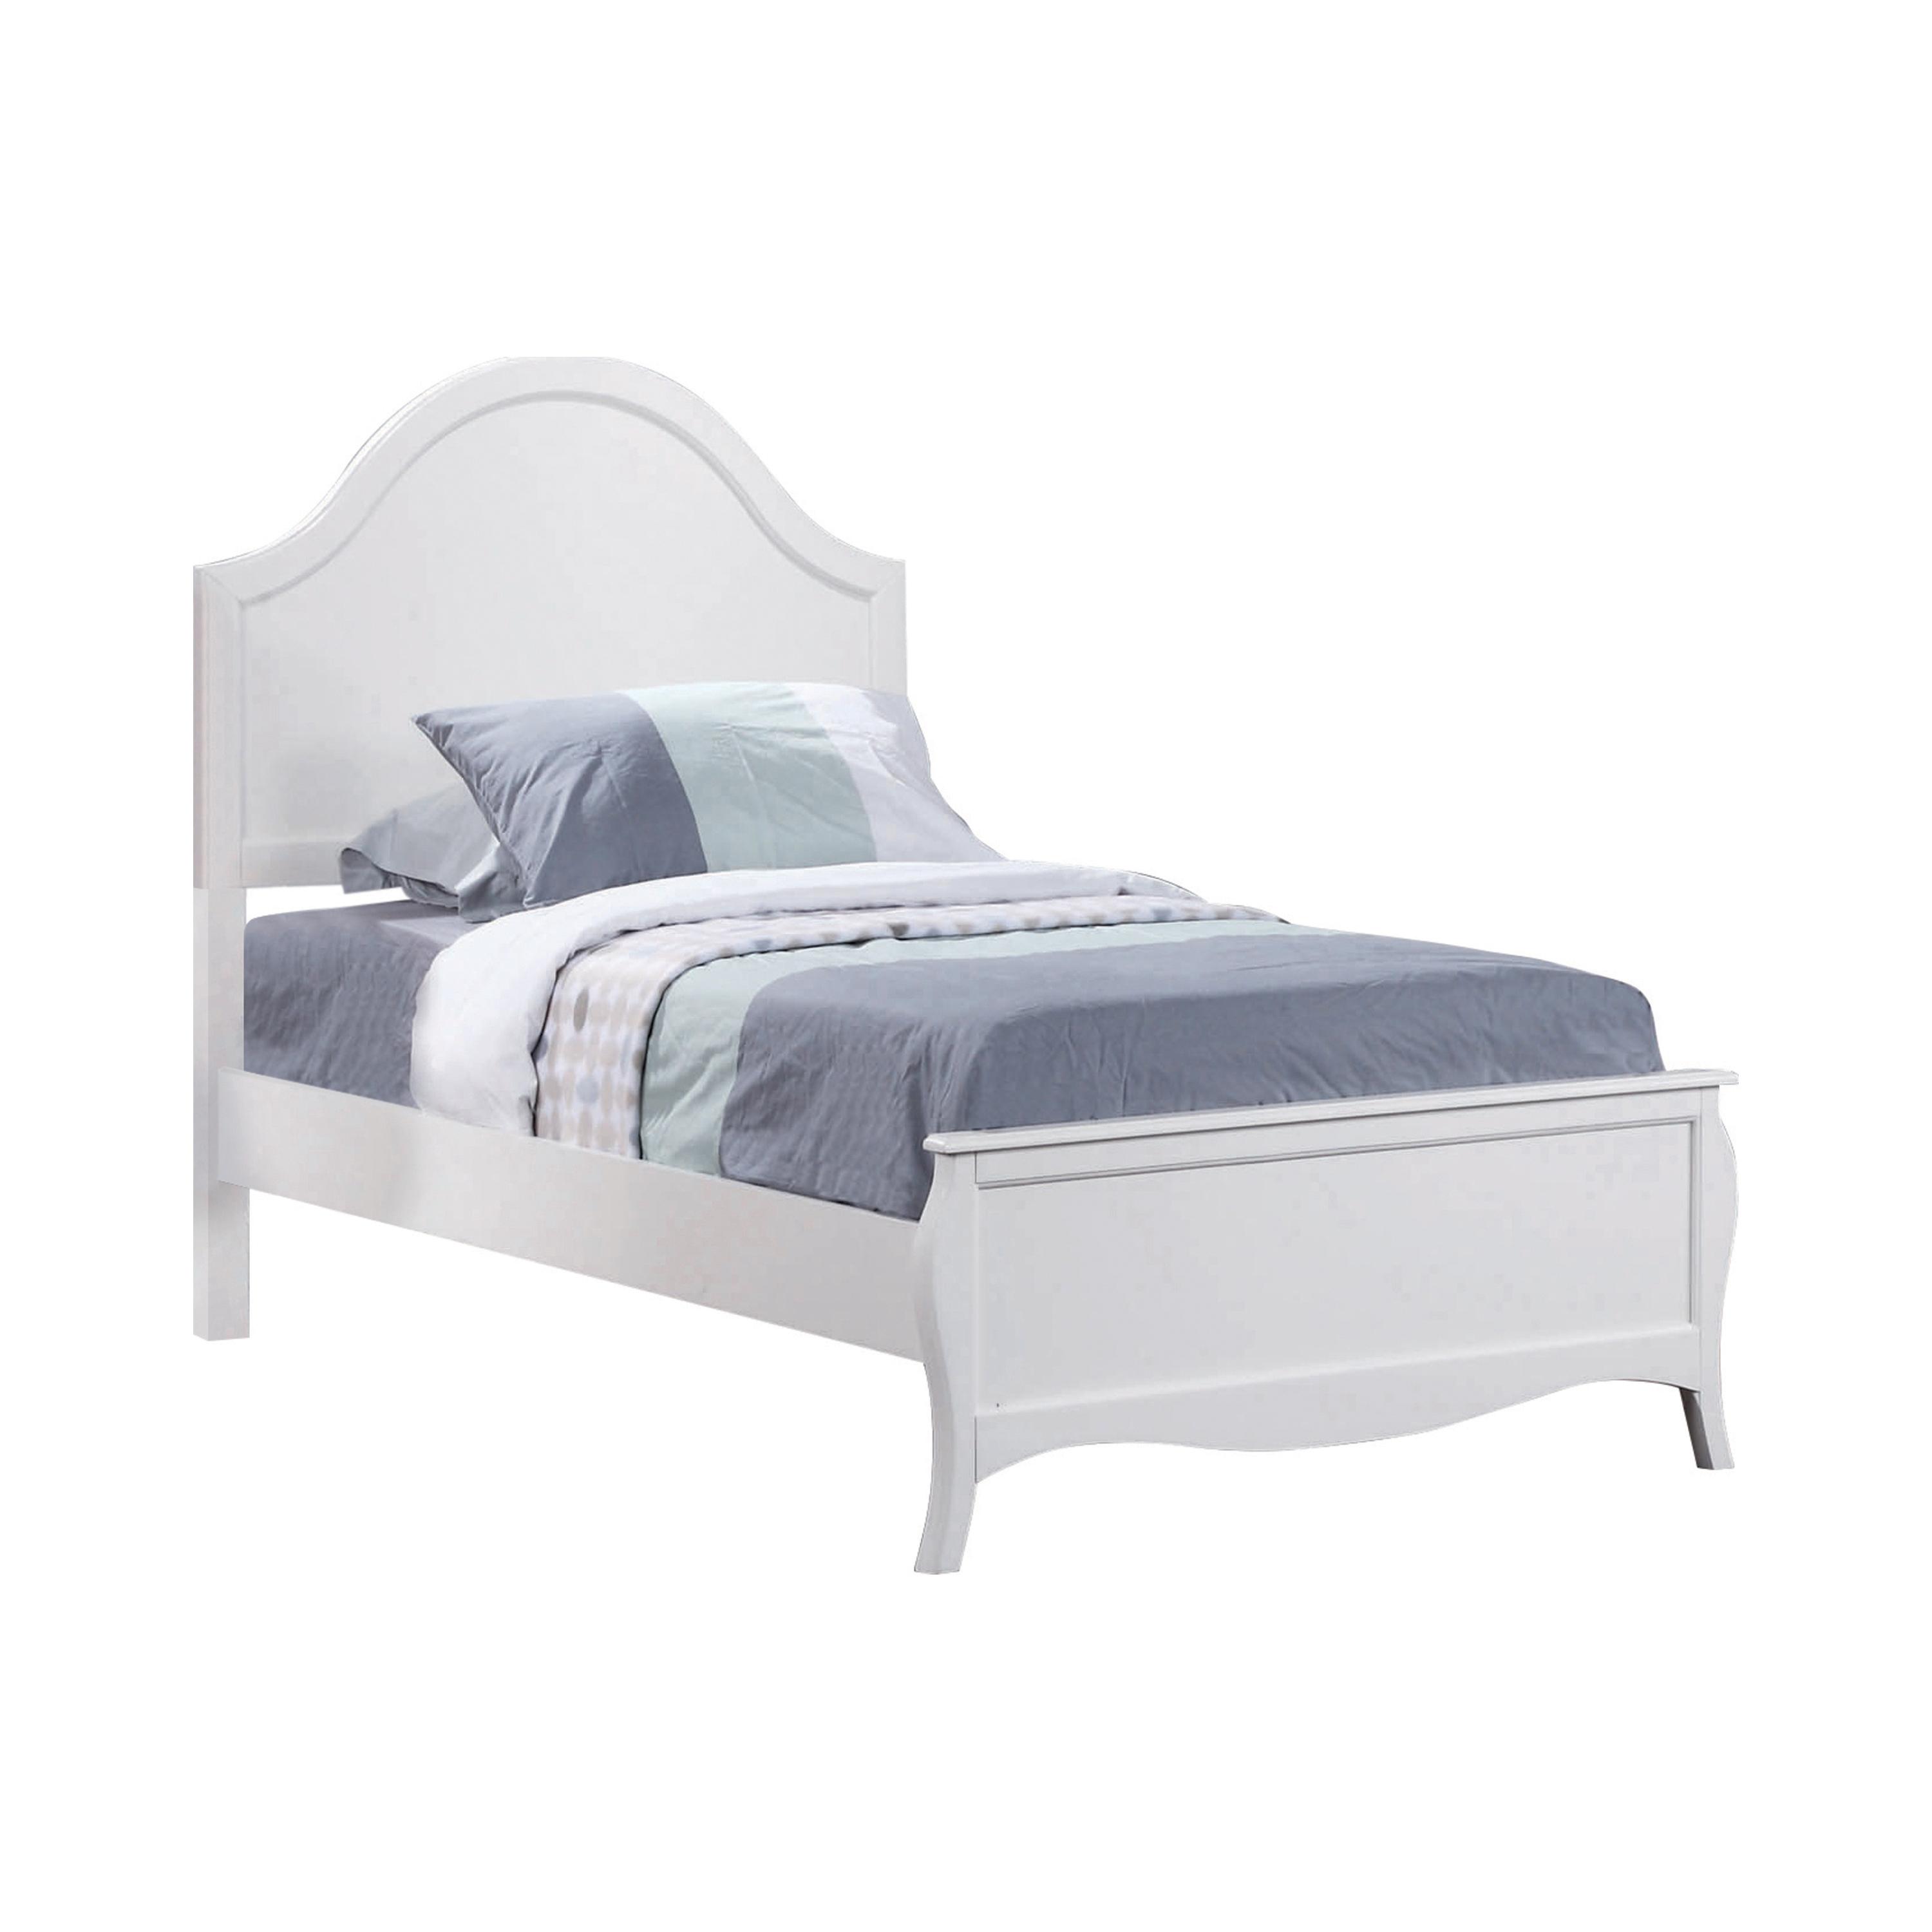 Traditional Bed 400561F Dominique 400561F in White 